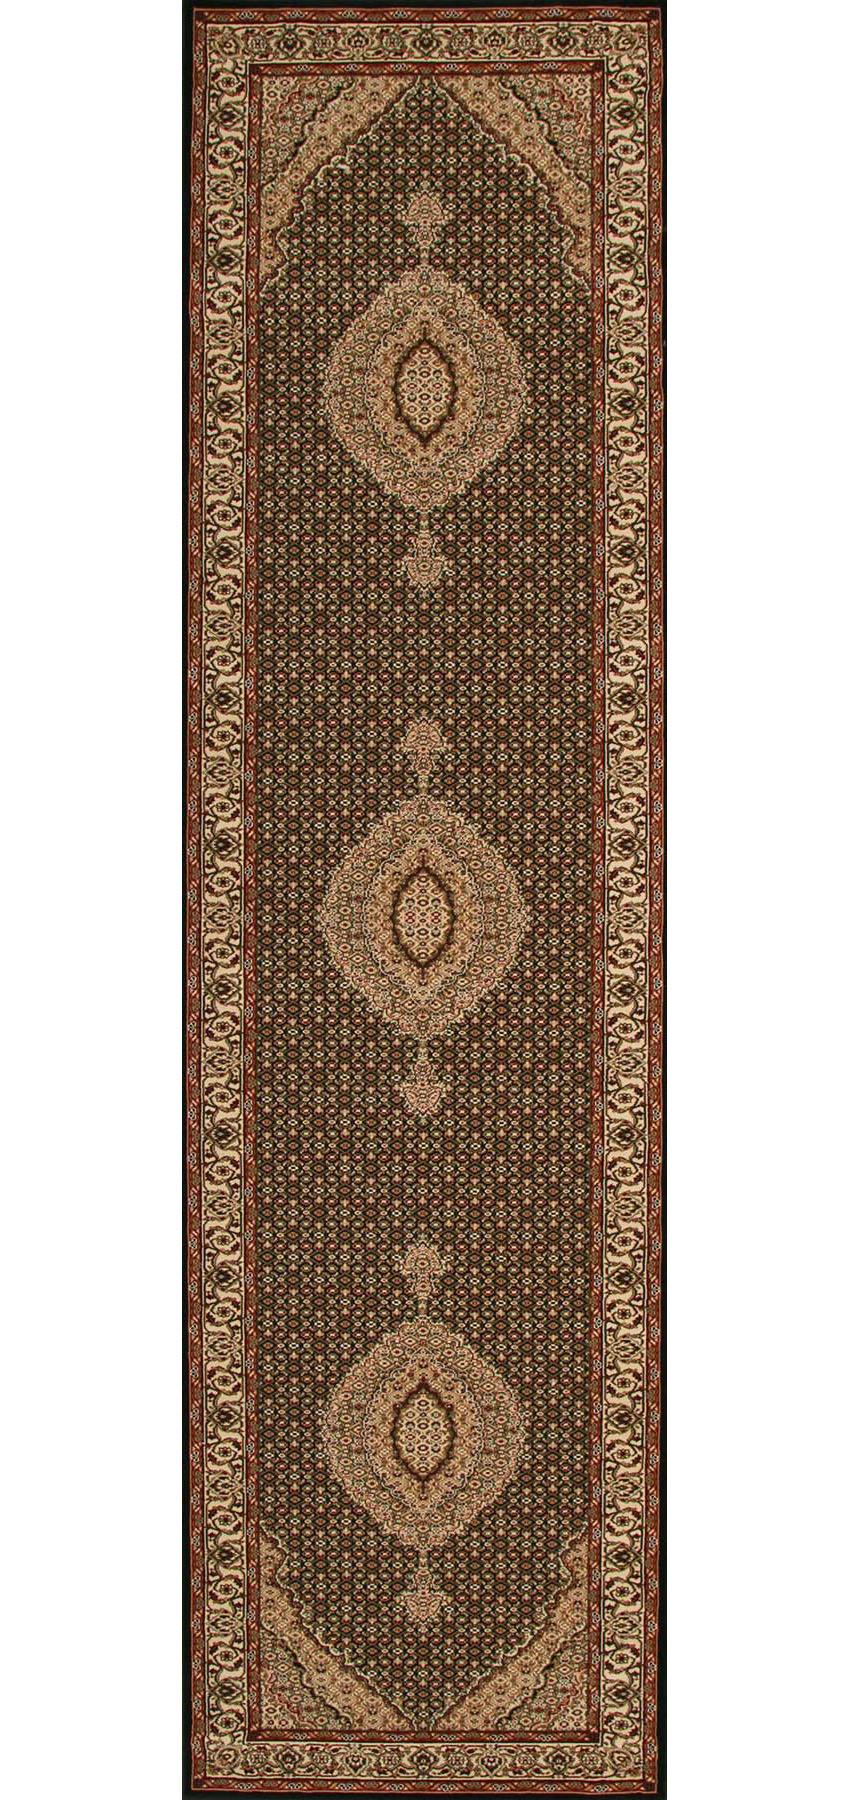 Empire Ark Black Runner Collections 50 Off Last Chance Product Detail Unitex International Whole Rugs Supplier